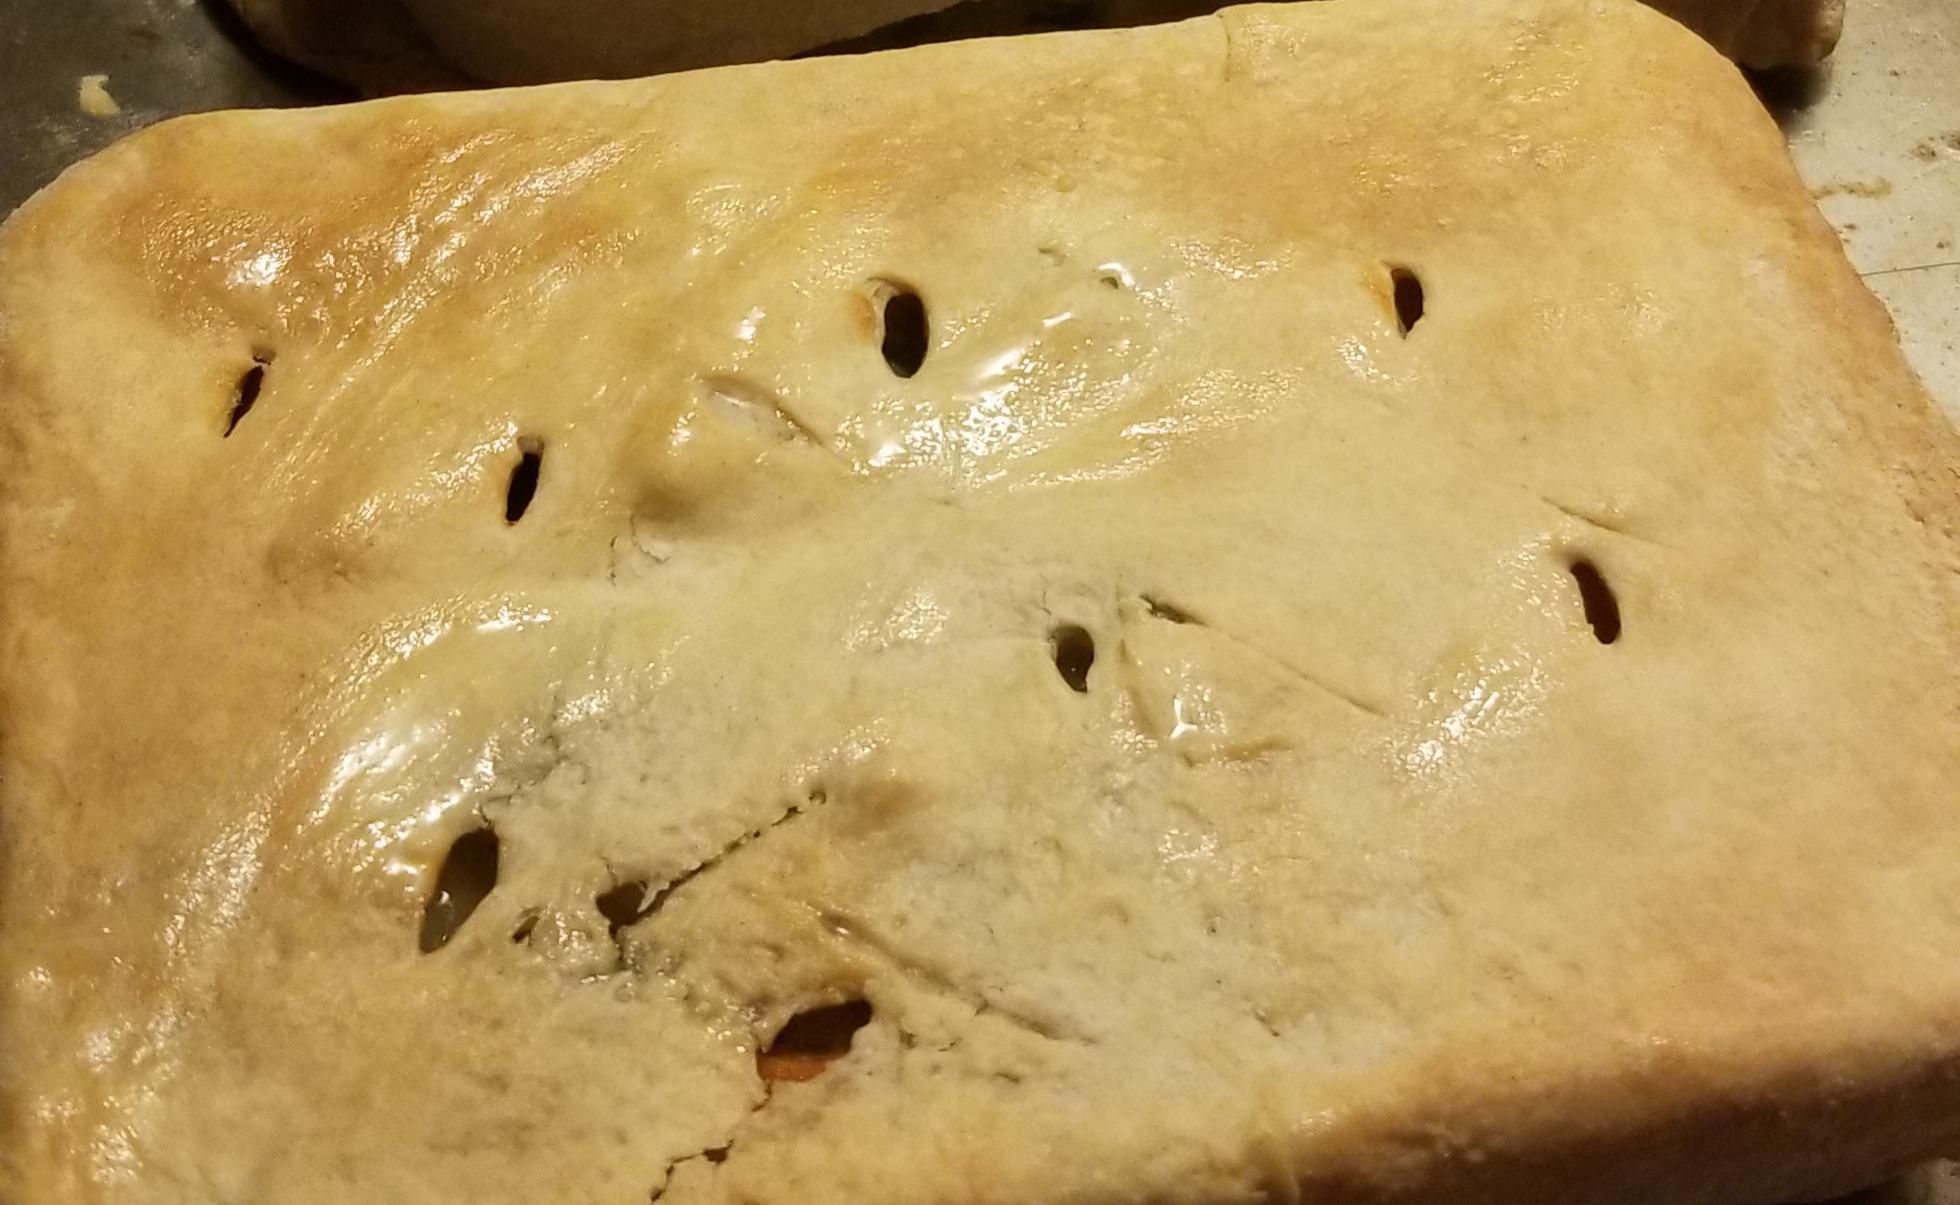 My husband says my homemade pot pie looks like the book of the dead, he's making jokes about how he ate the necronomicon and isnt sure he said the chant right.... yep